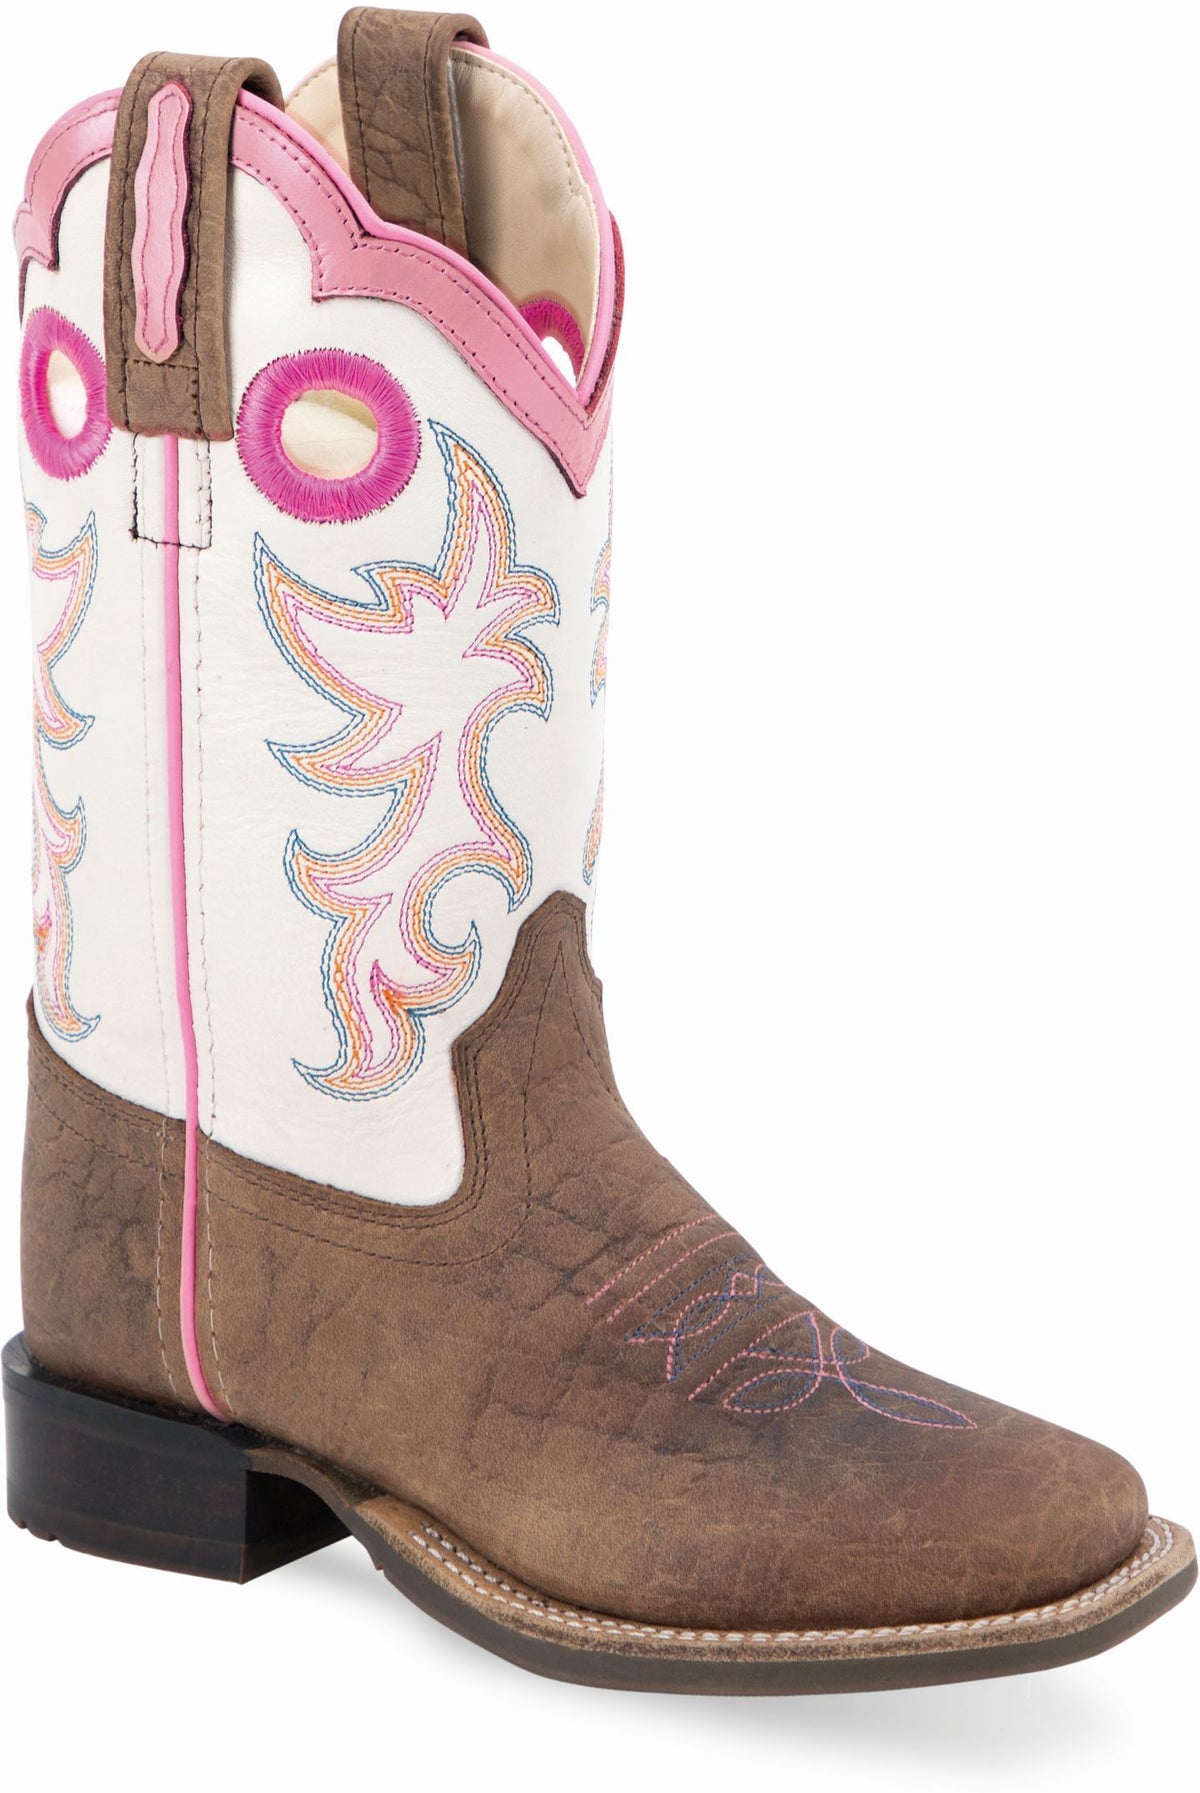 Old West Brown Bull Hide Print Foot White Shaft with Pink Collar Youth's Broad Square Toe Boots